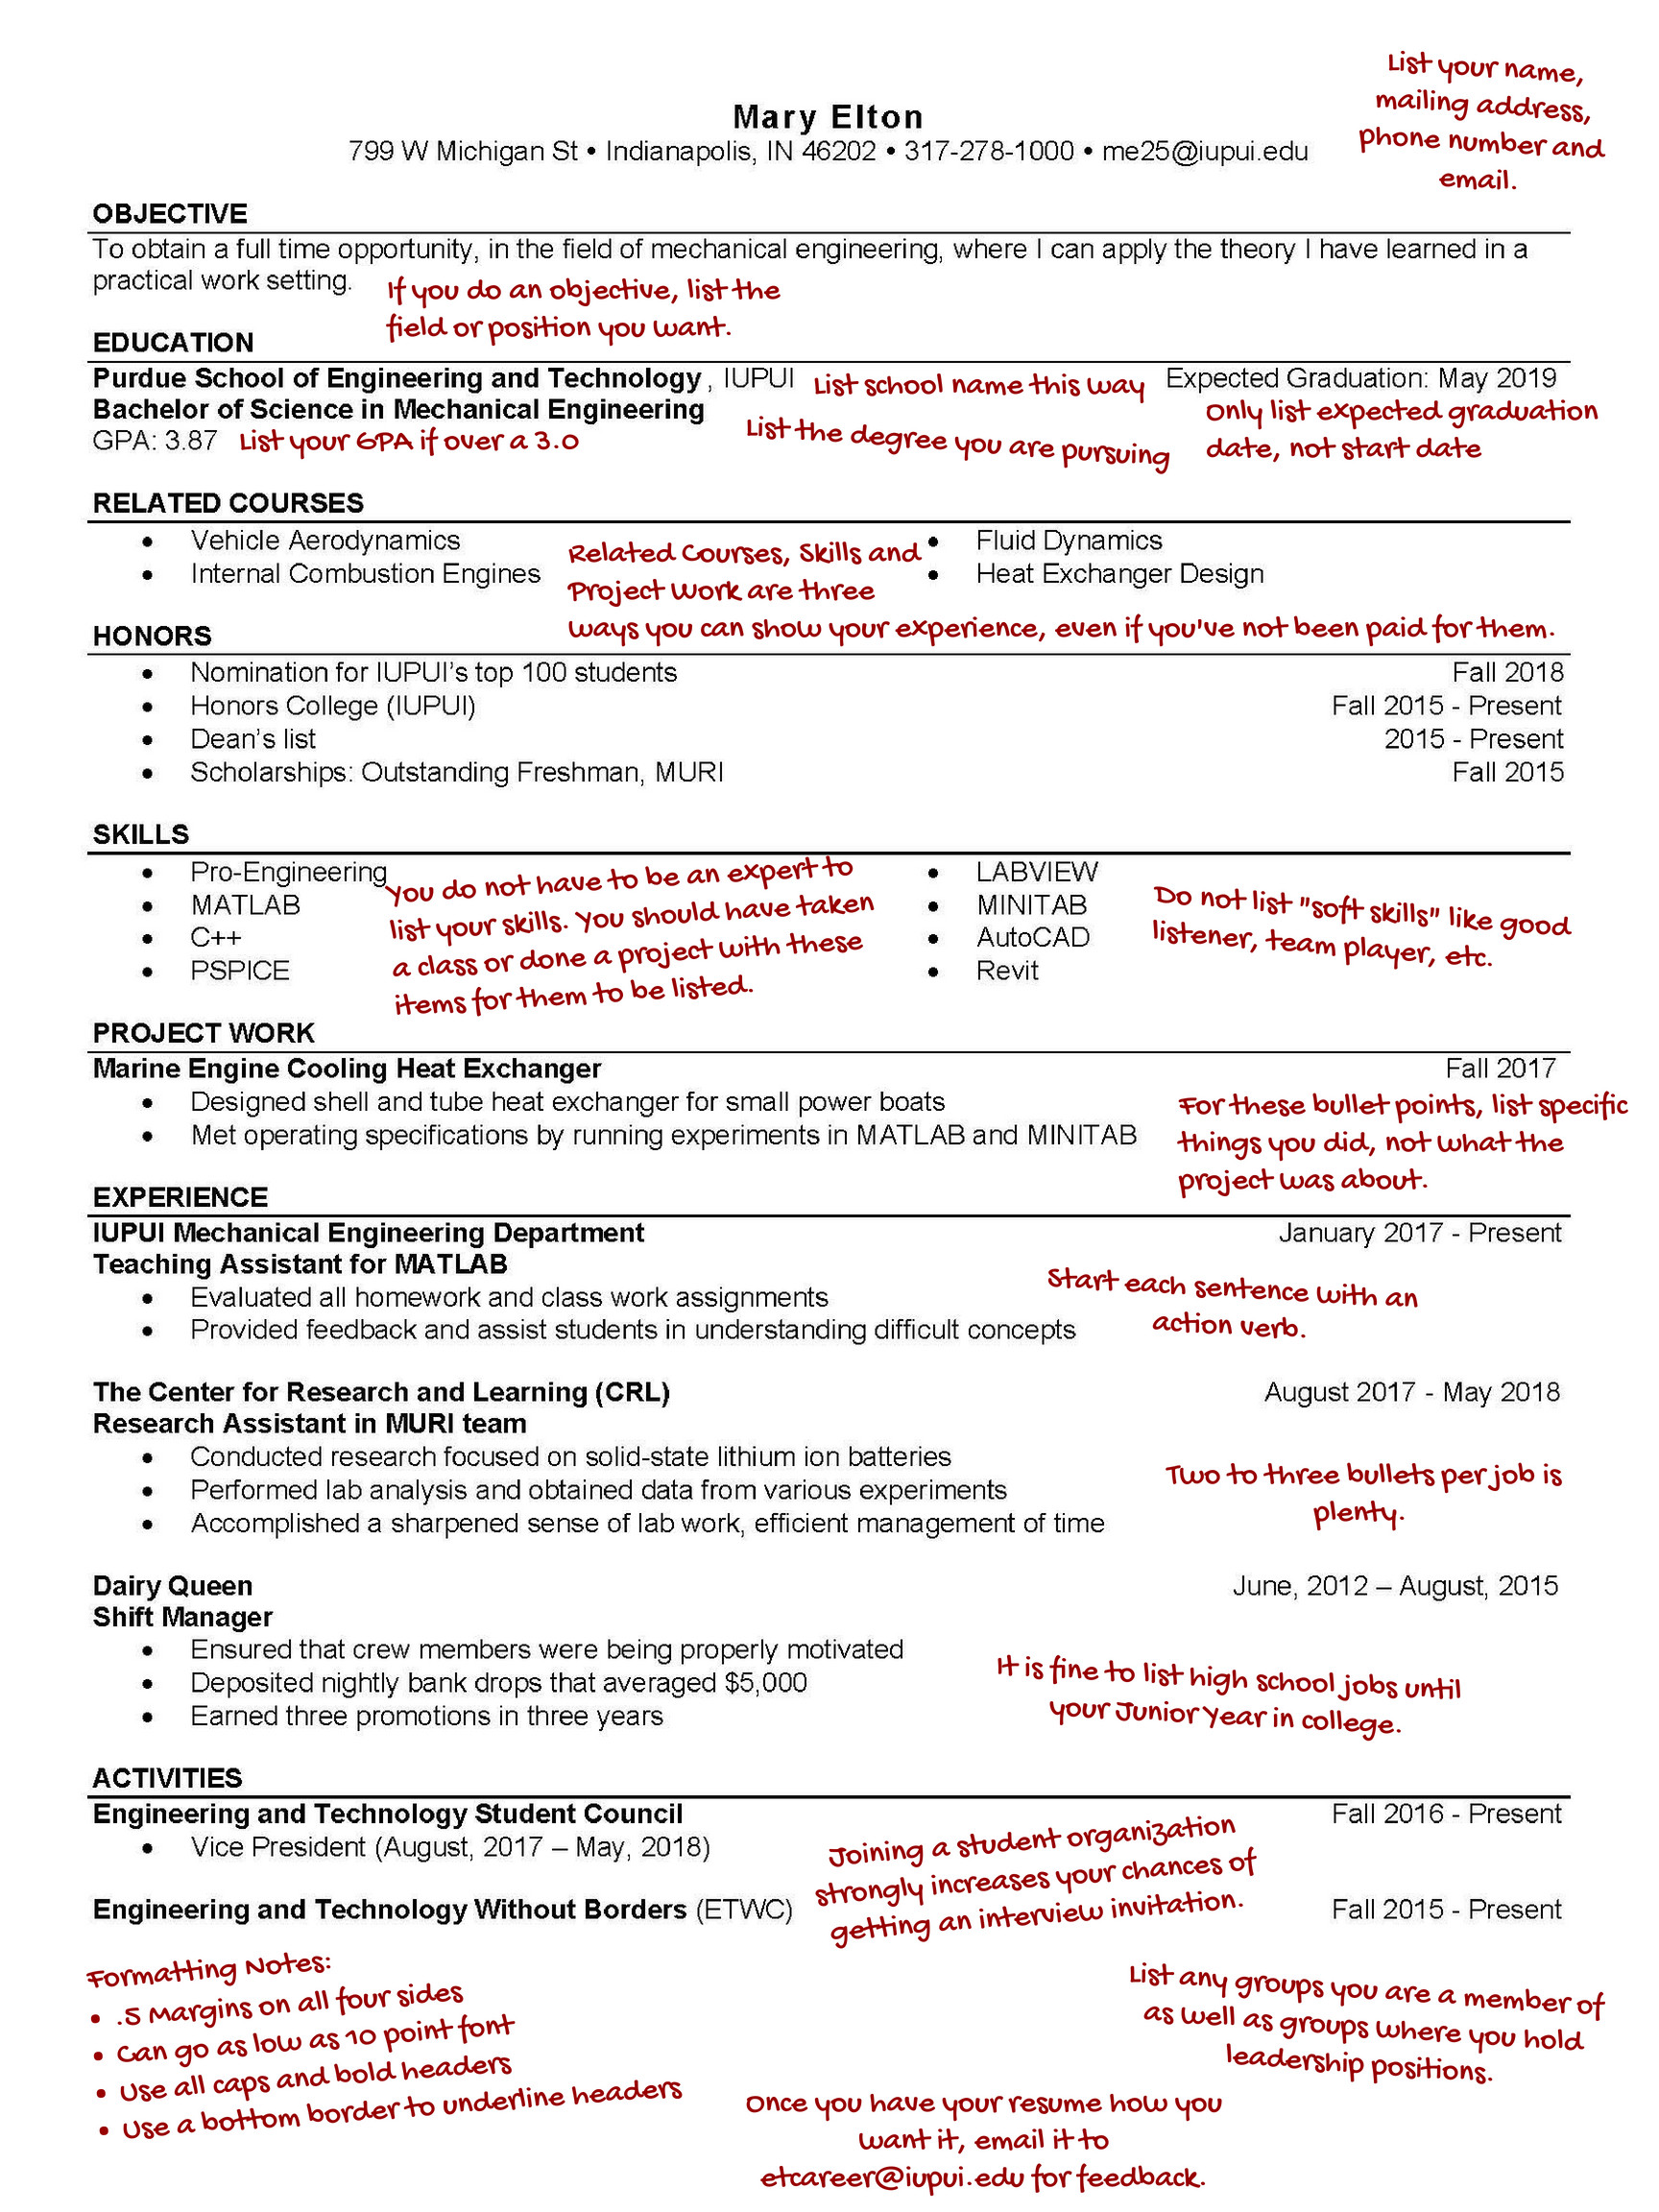 Sample Resume for Academic for Mechanical Engineering Chair Resumes: Career Services: Student Services: Purdue School Of …